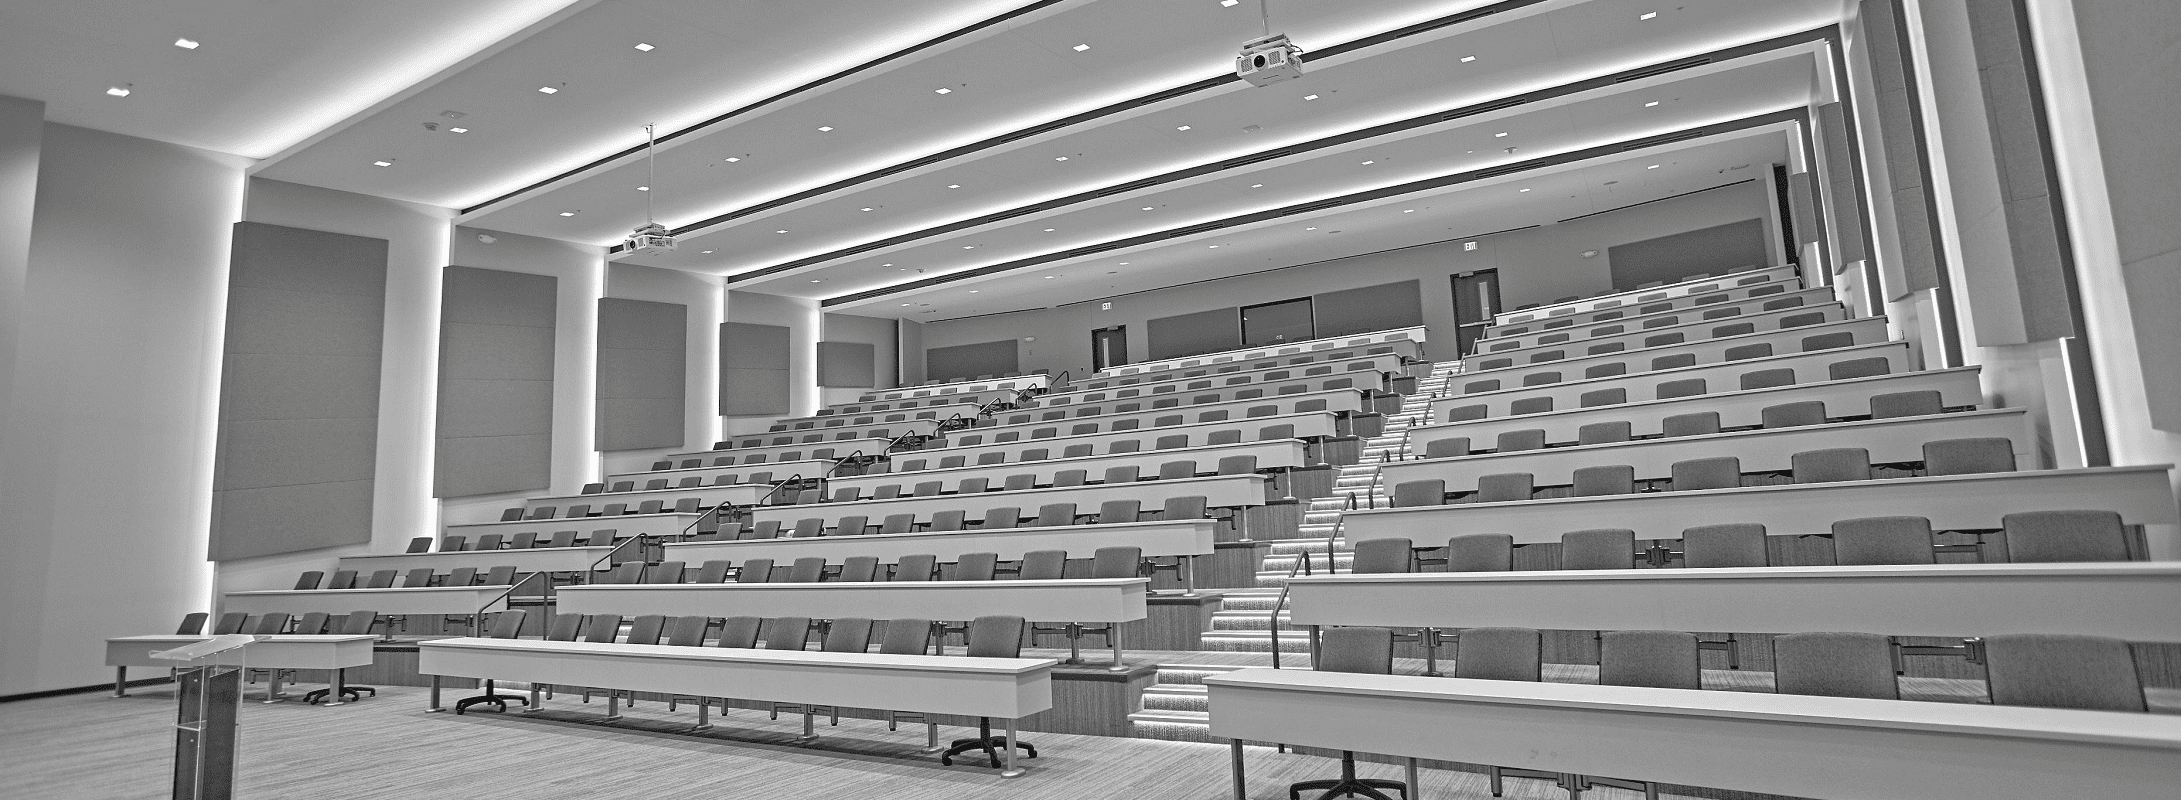 The interior of a modern lecture hall at St. Rita's Medical Center Graduate Education Medical wing.